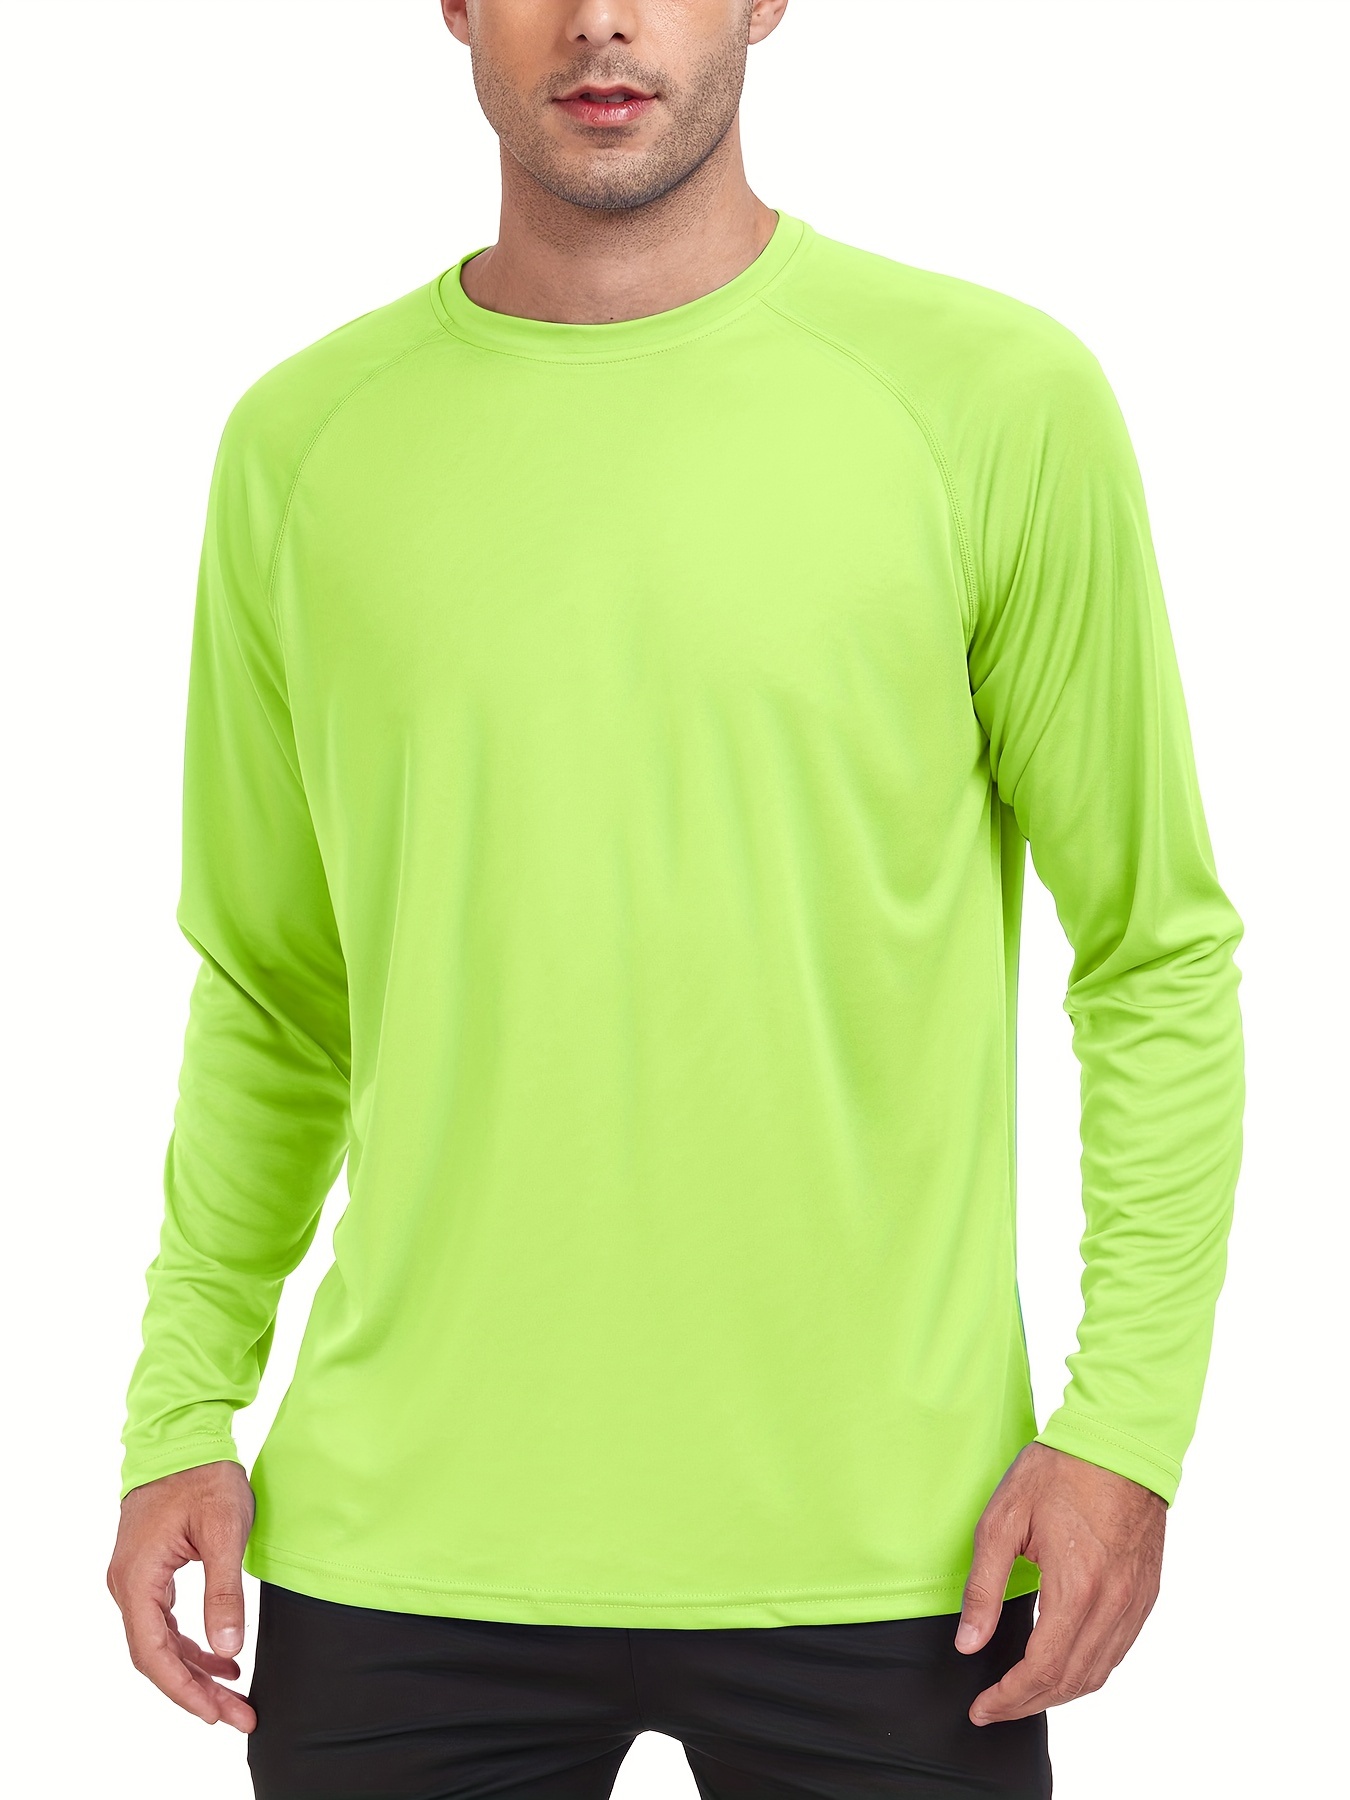 Avalanche outdoor supply Mens Medium Green Tshirt Soft Relaxed Fit Tee 